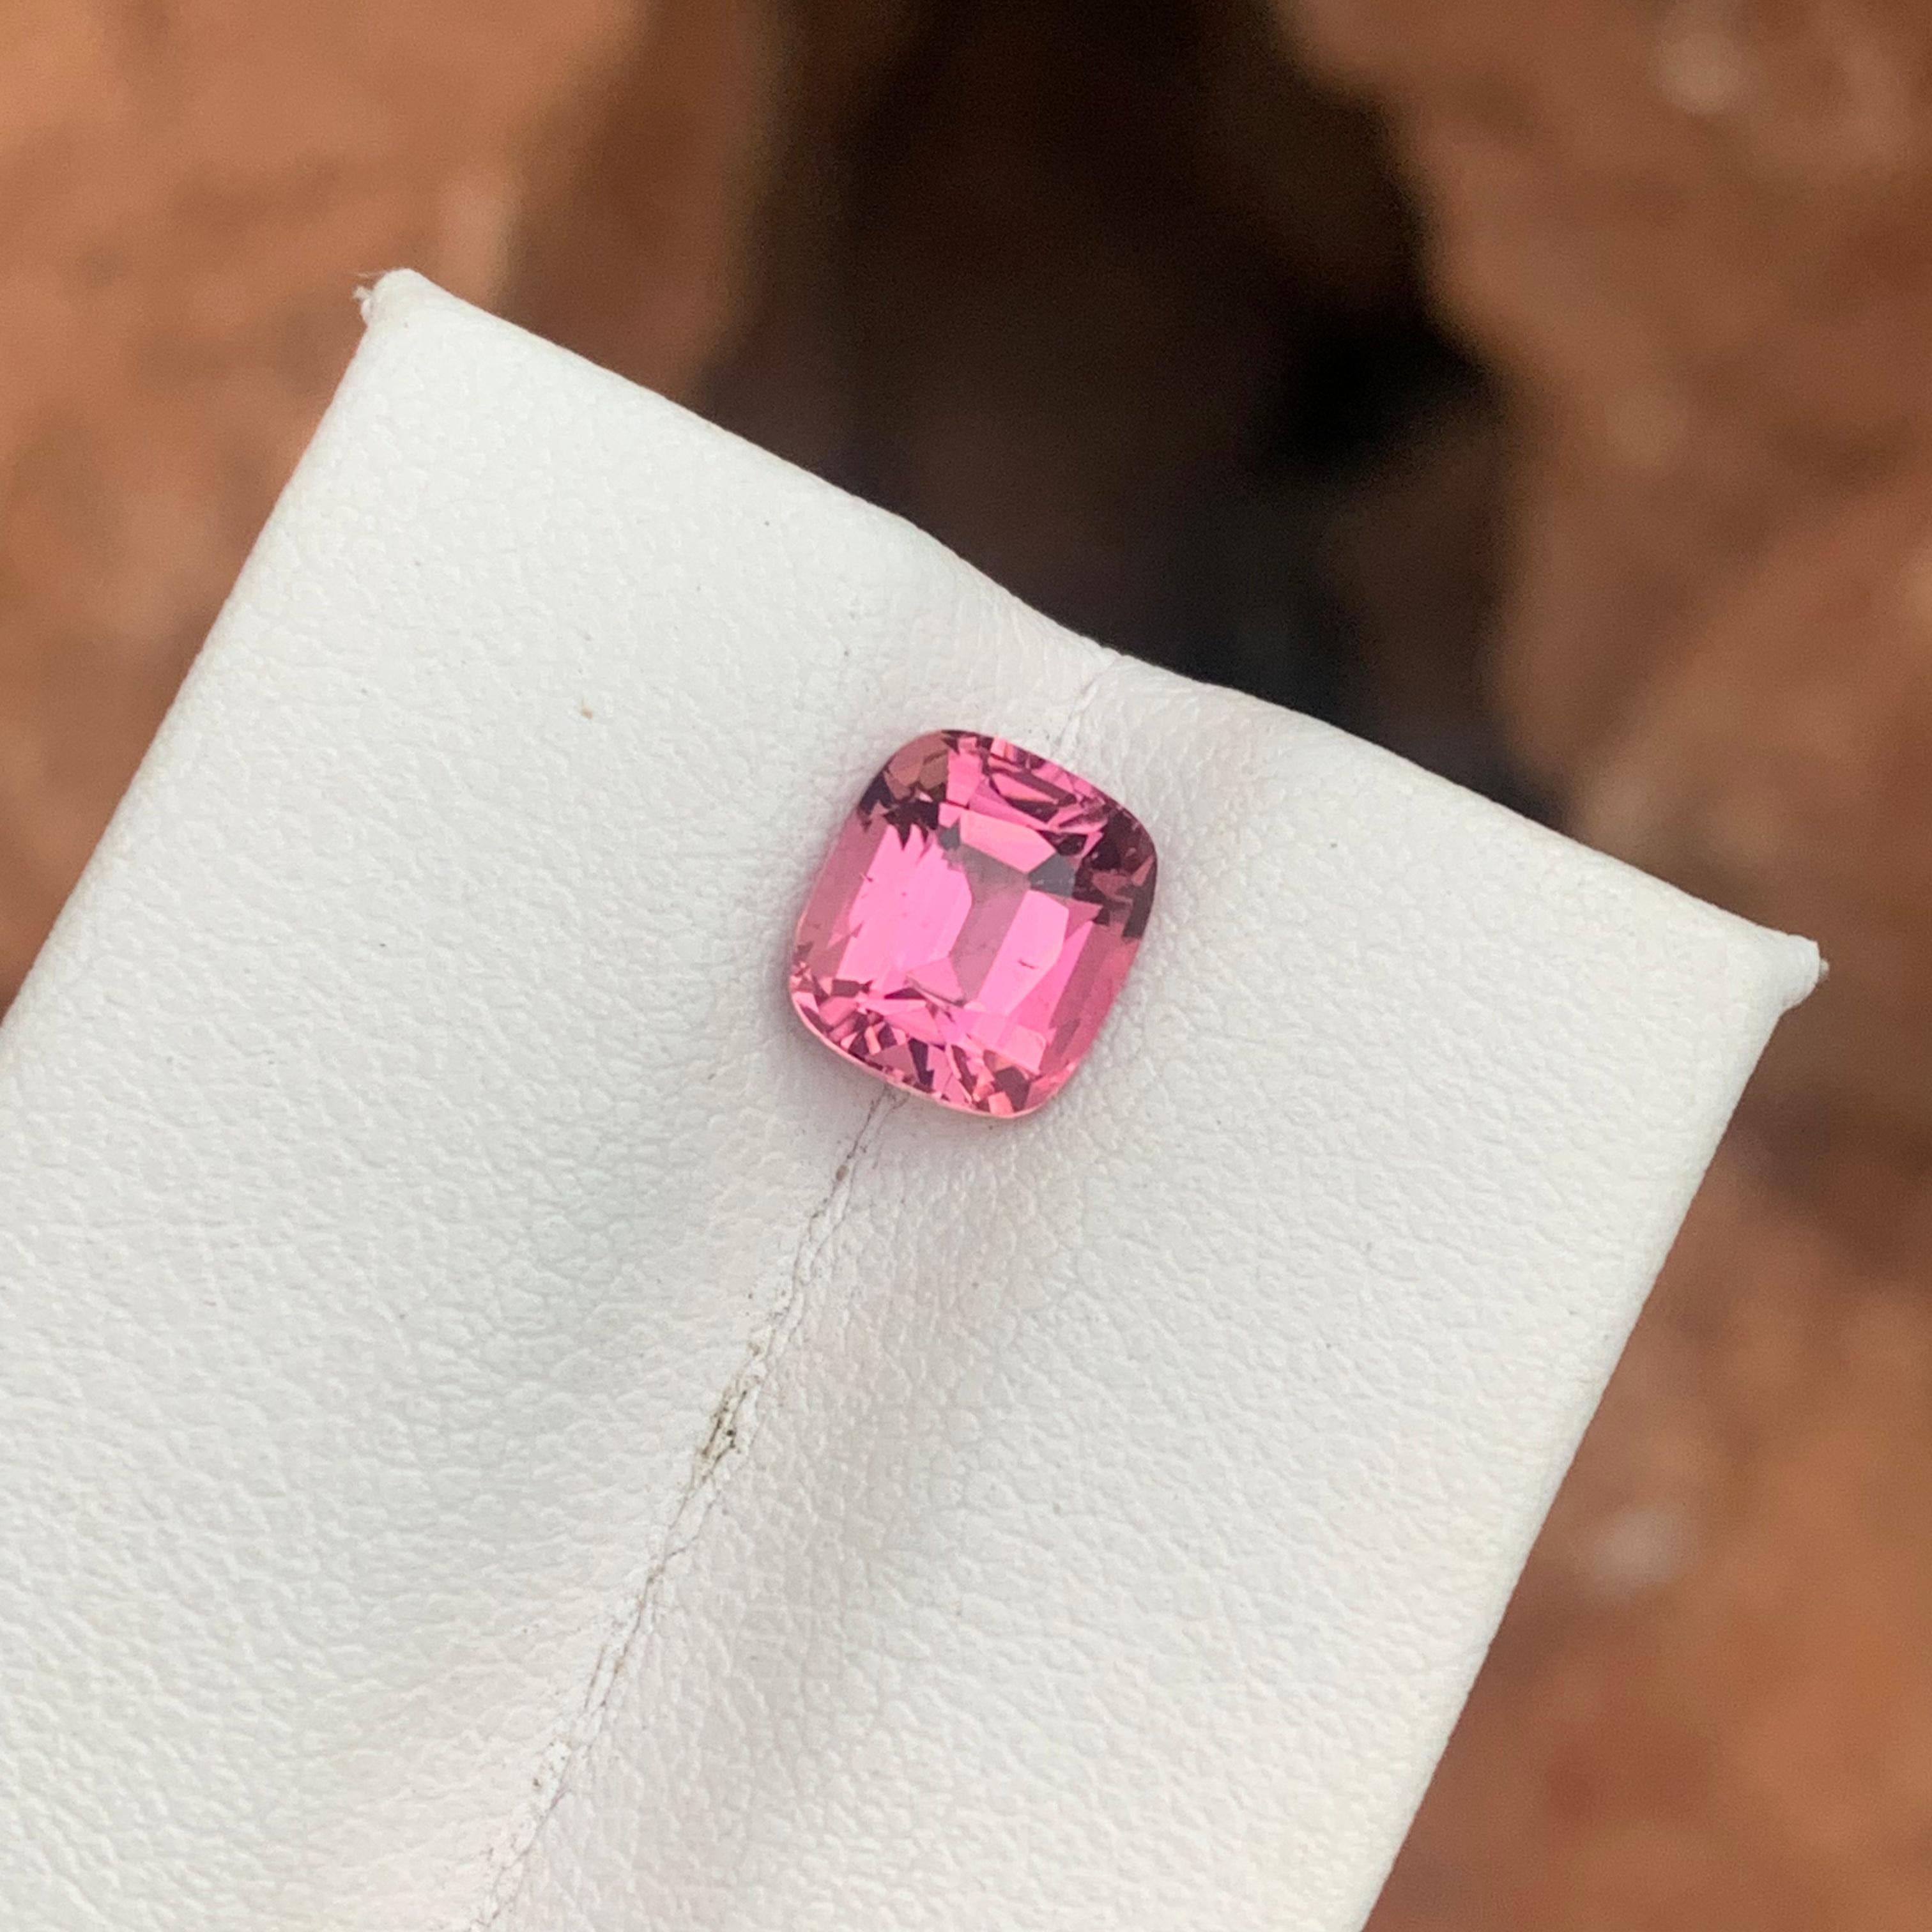 Faceted Tourmaline 
Weight: 1.90 Carats 
Dimension: 7.8x6.9x5.2 Mm
Origin: Kunar Afghanistan 
Shape: Cushion 
Color: Pink
Treatment: Non
Certficate: On Customer Demand 
.
Pink tourmaline, also known as rubellite, is a stunning gemstone renowned for